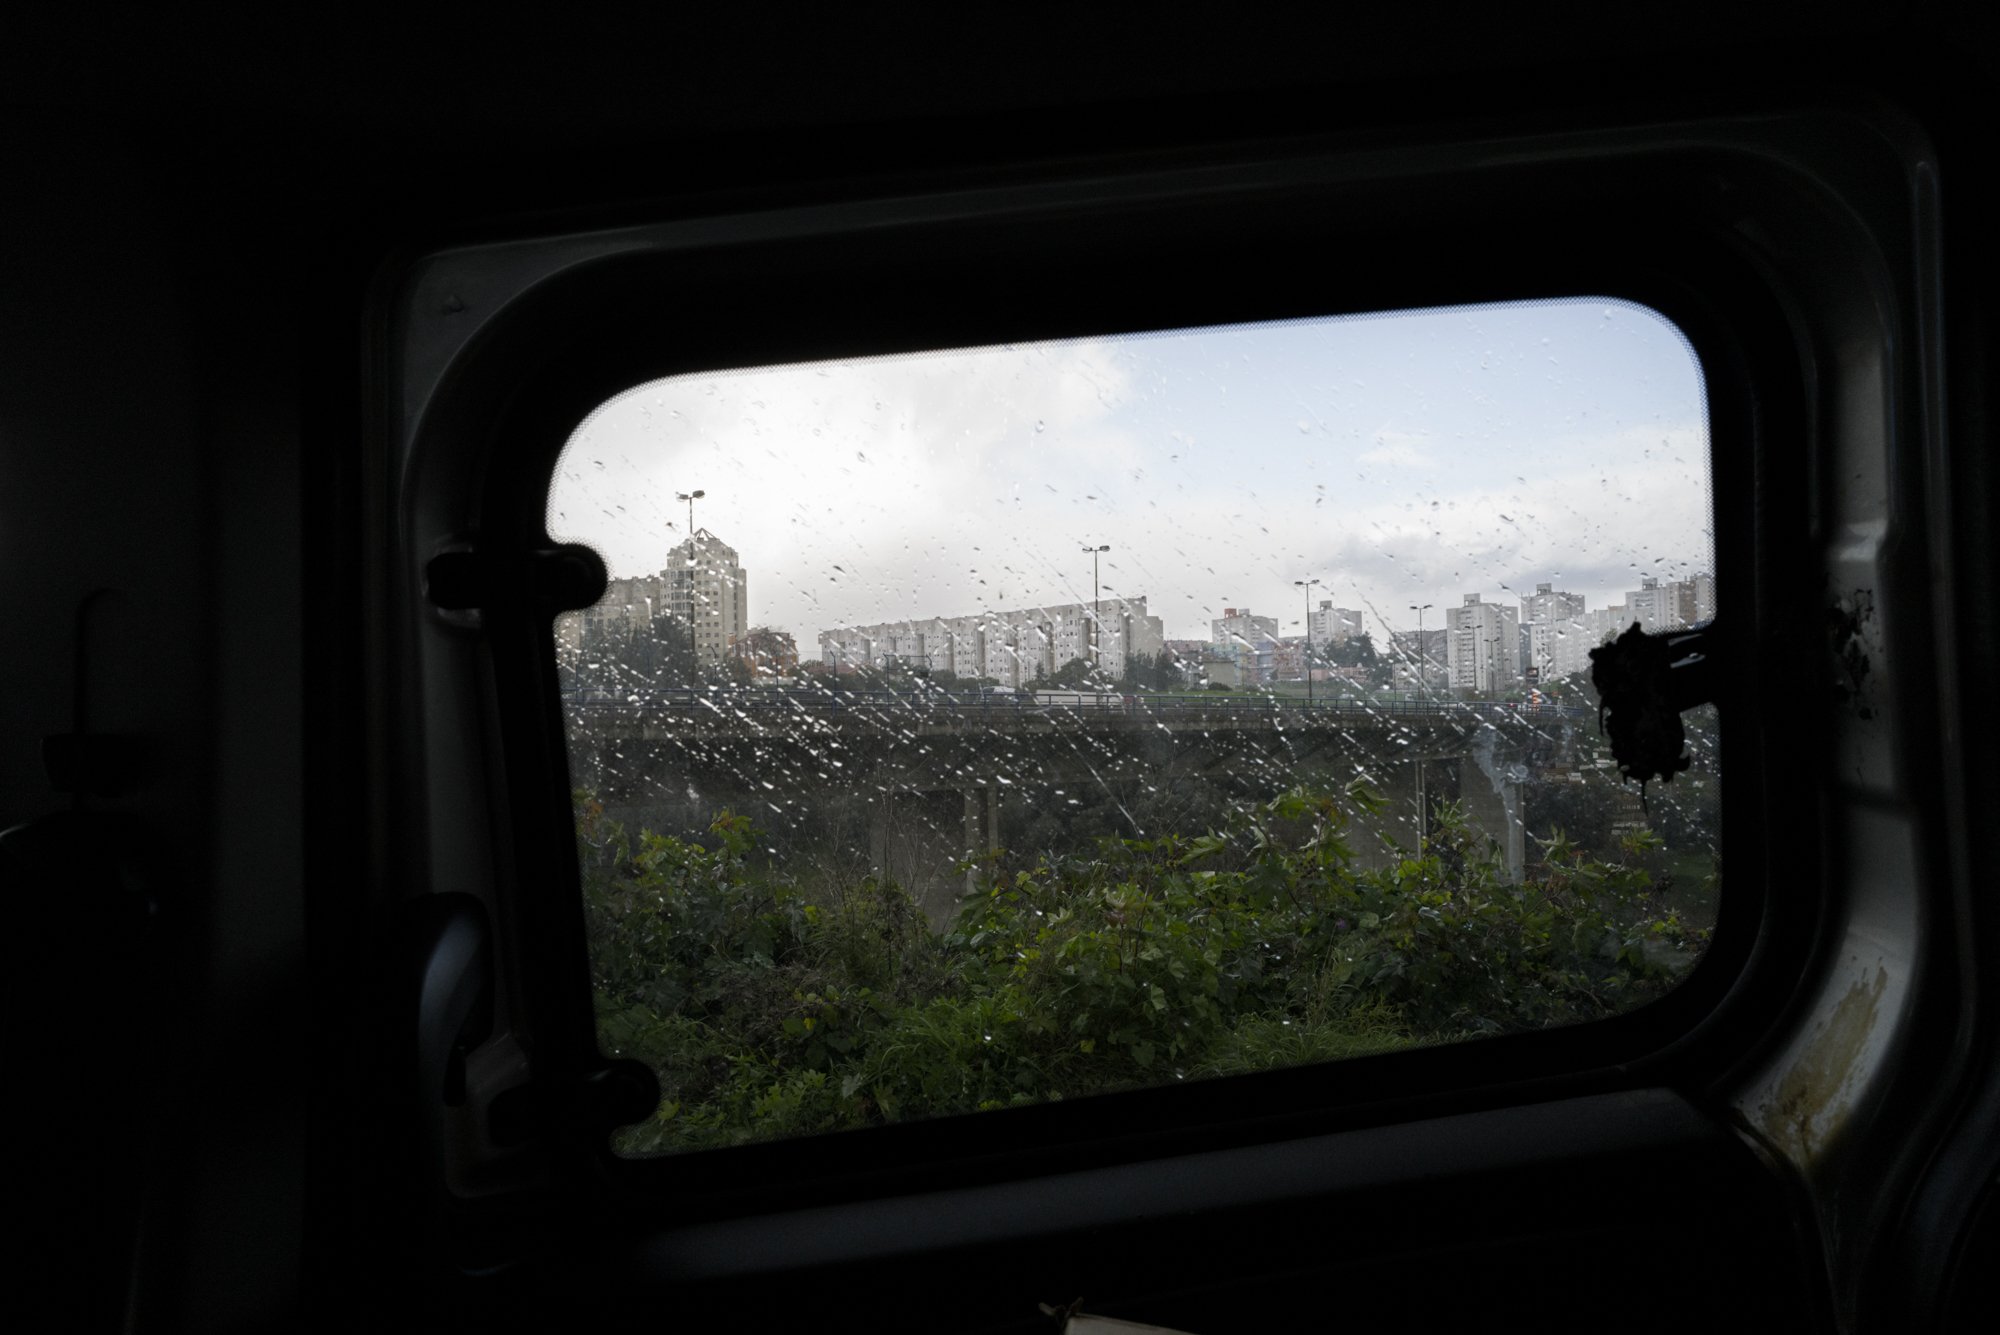  A view of Olaias, Lisbon, from Crescer’s car. For the past 20 years, two outreach teams made up of psychologists, social workers and nurses, have traveled to Lisbon’s many squalid and dark places where addicts use. 4/12/2020 